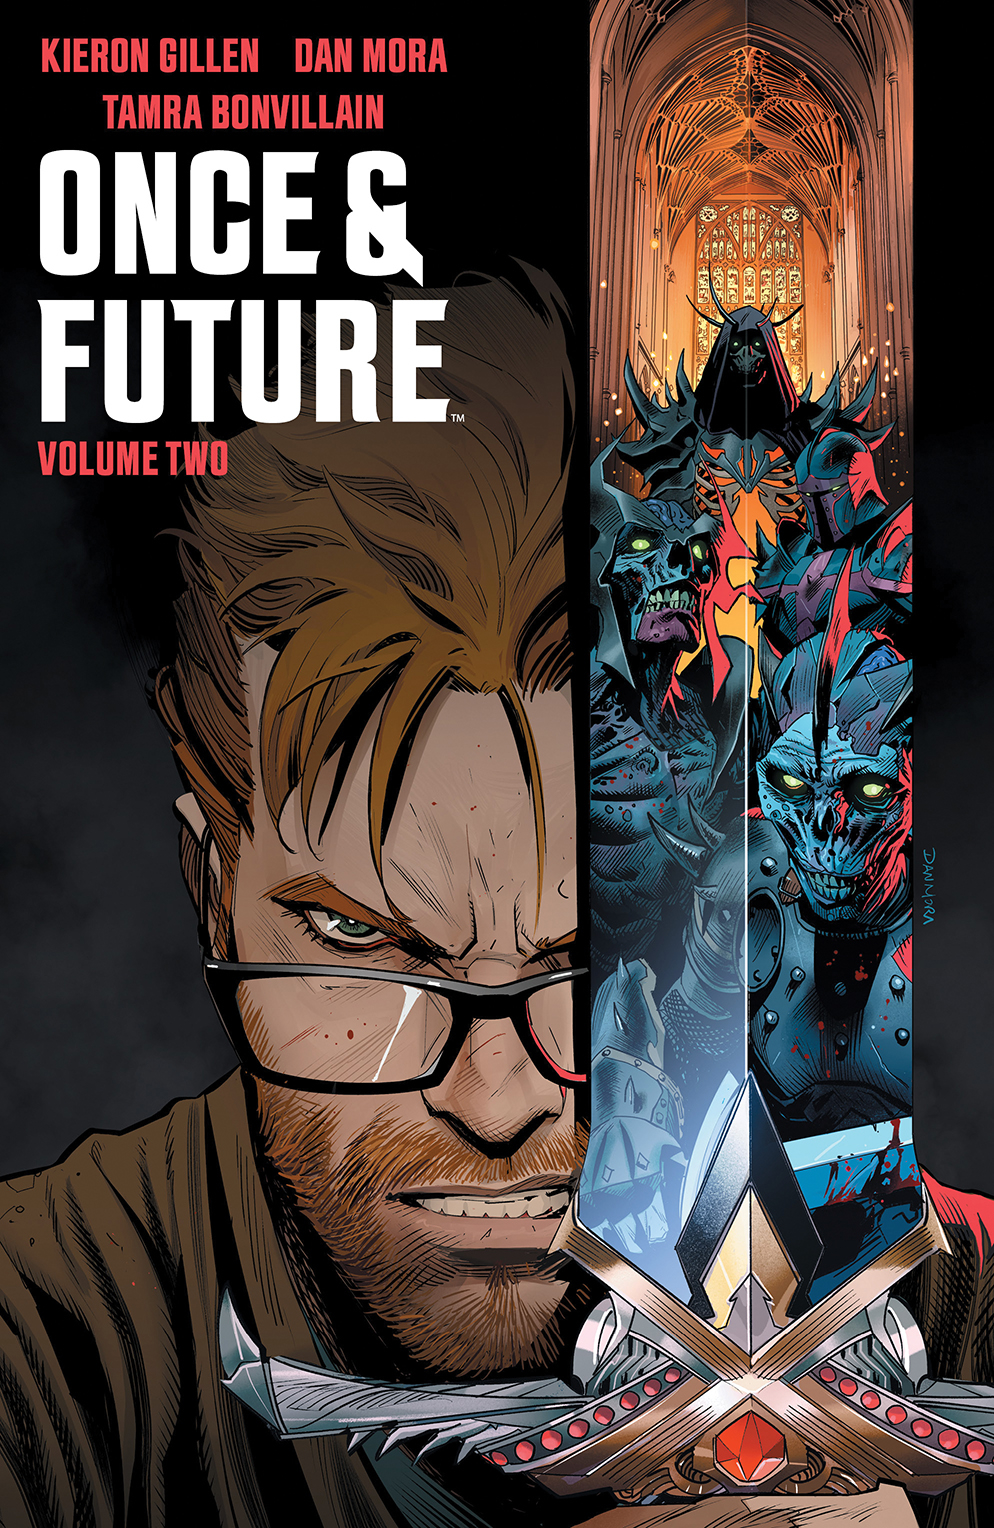 Once & Future Graphic Novel Volume 2